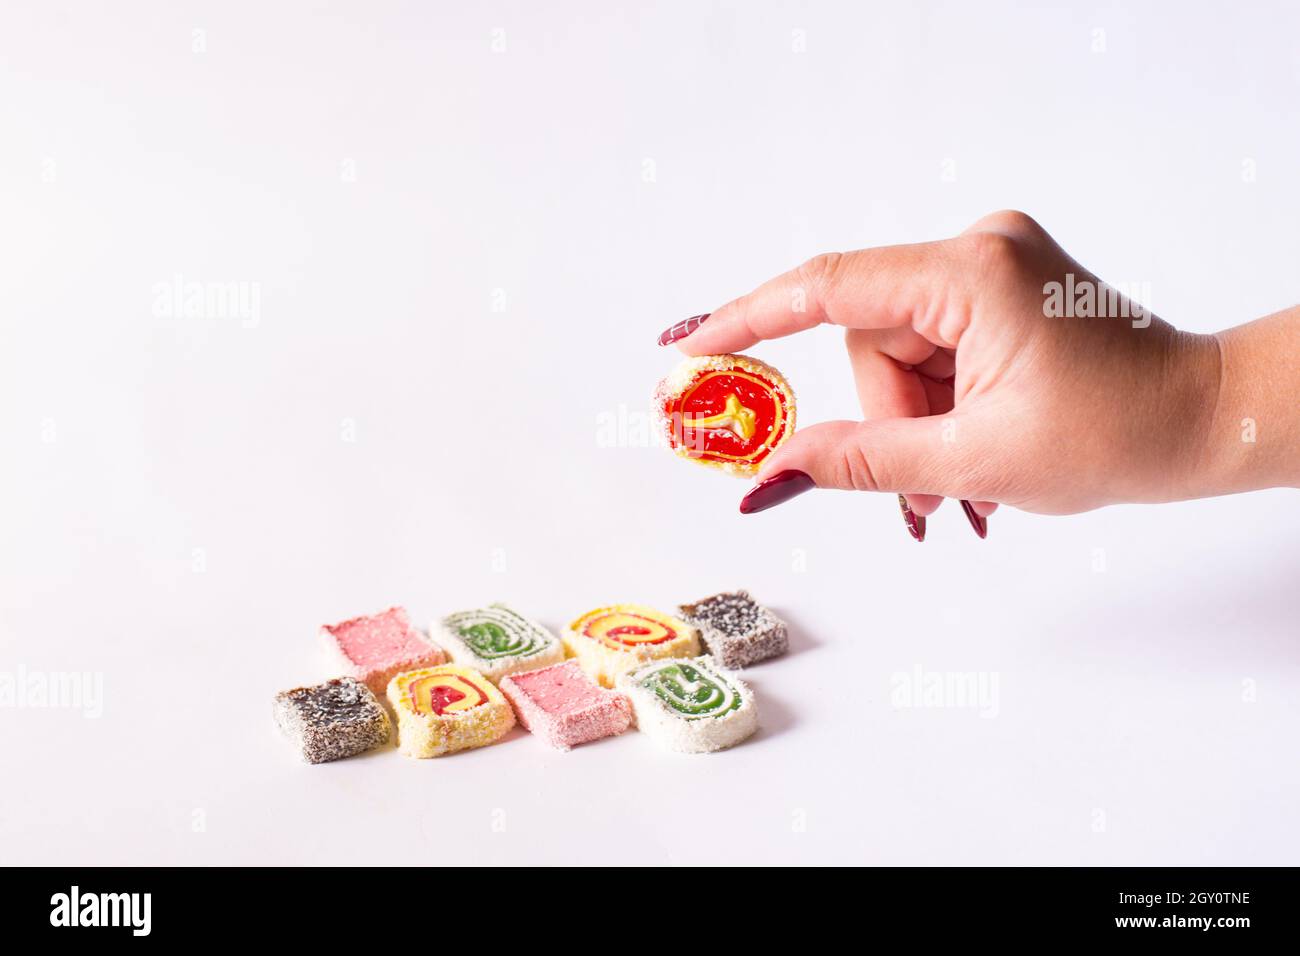 Turkish delight holding female hand bright orange color, on a white backgroud. Stock Photo